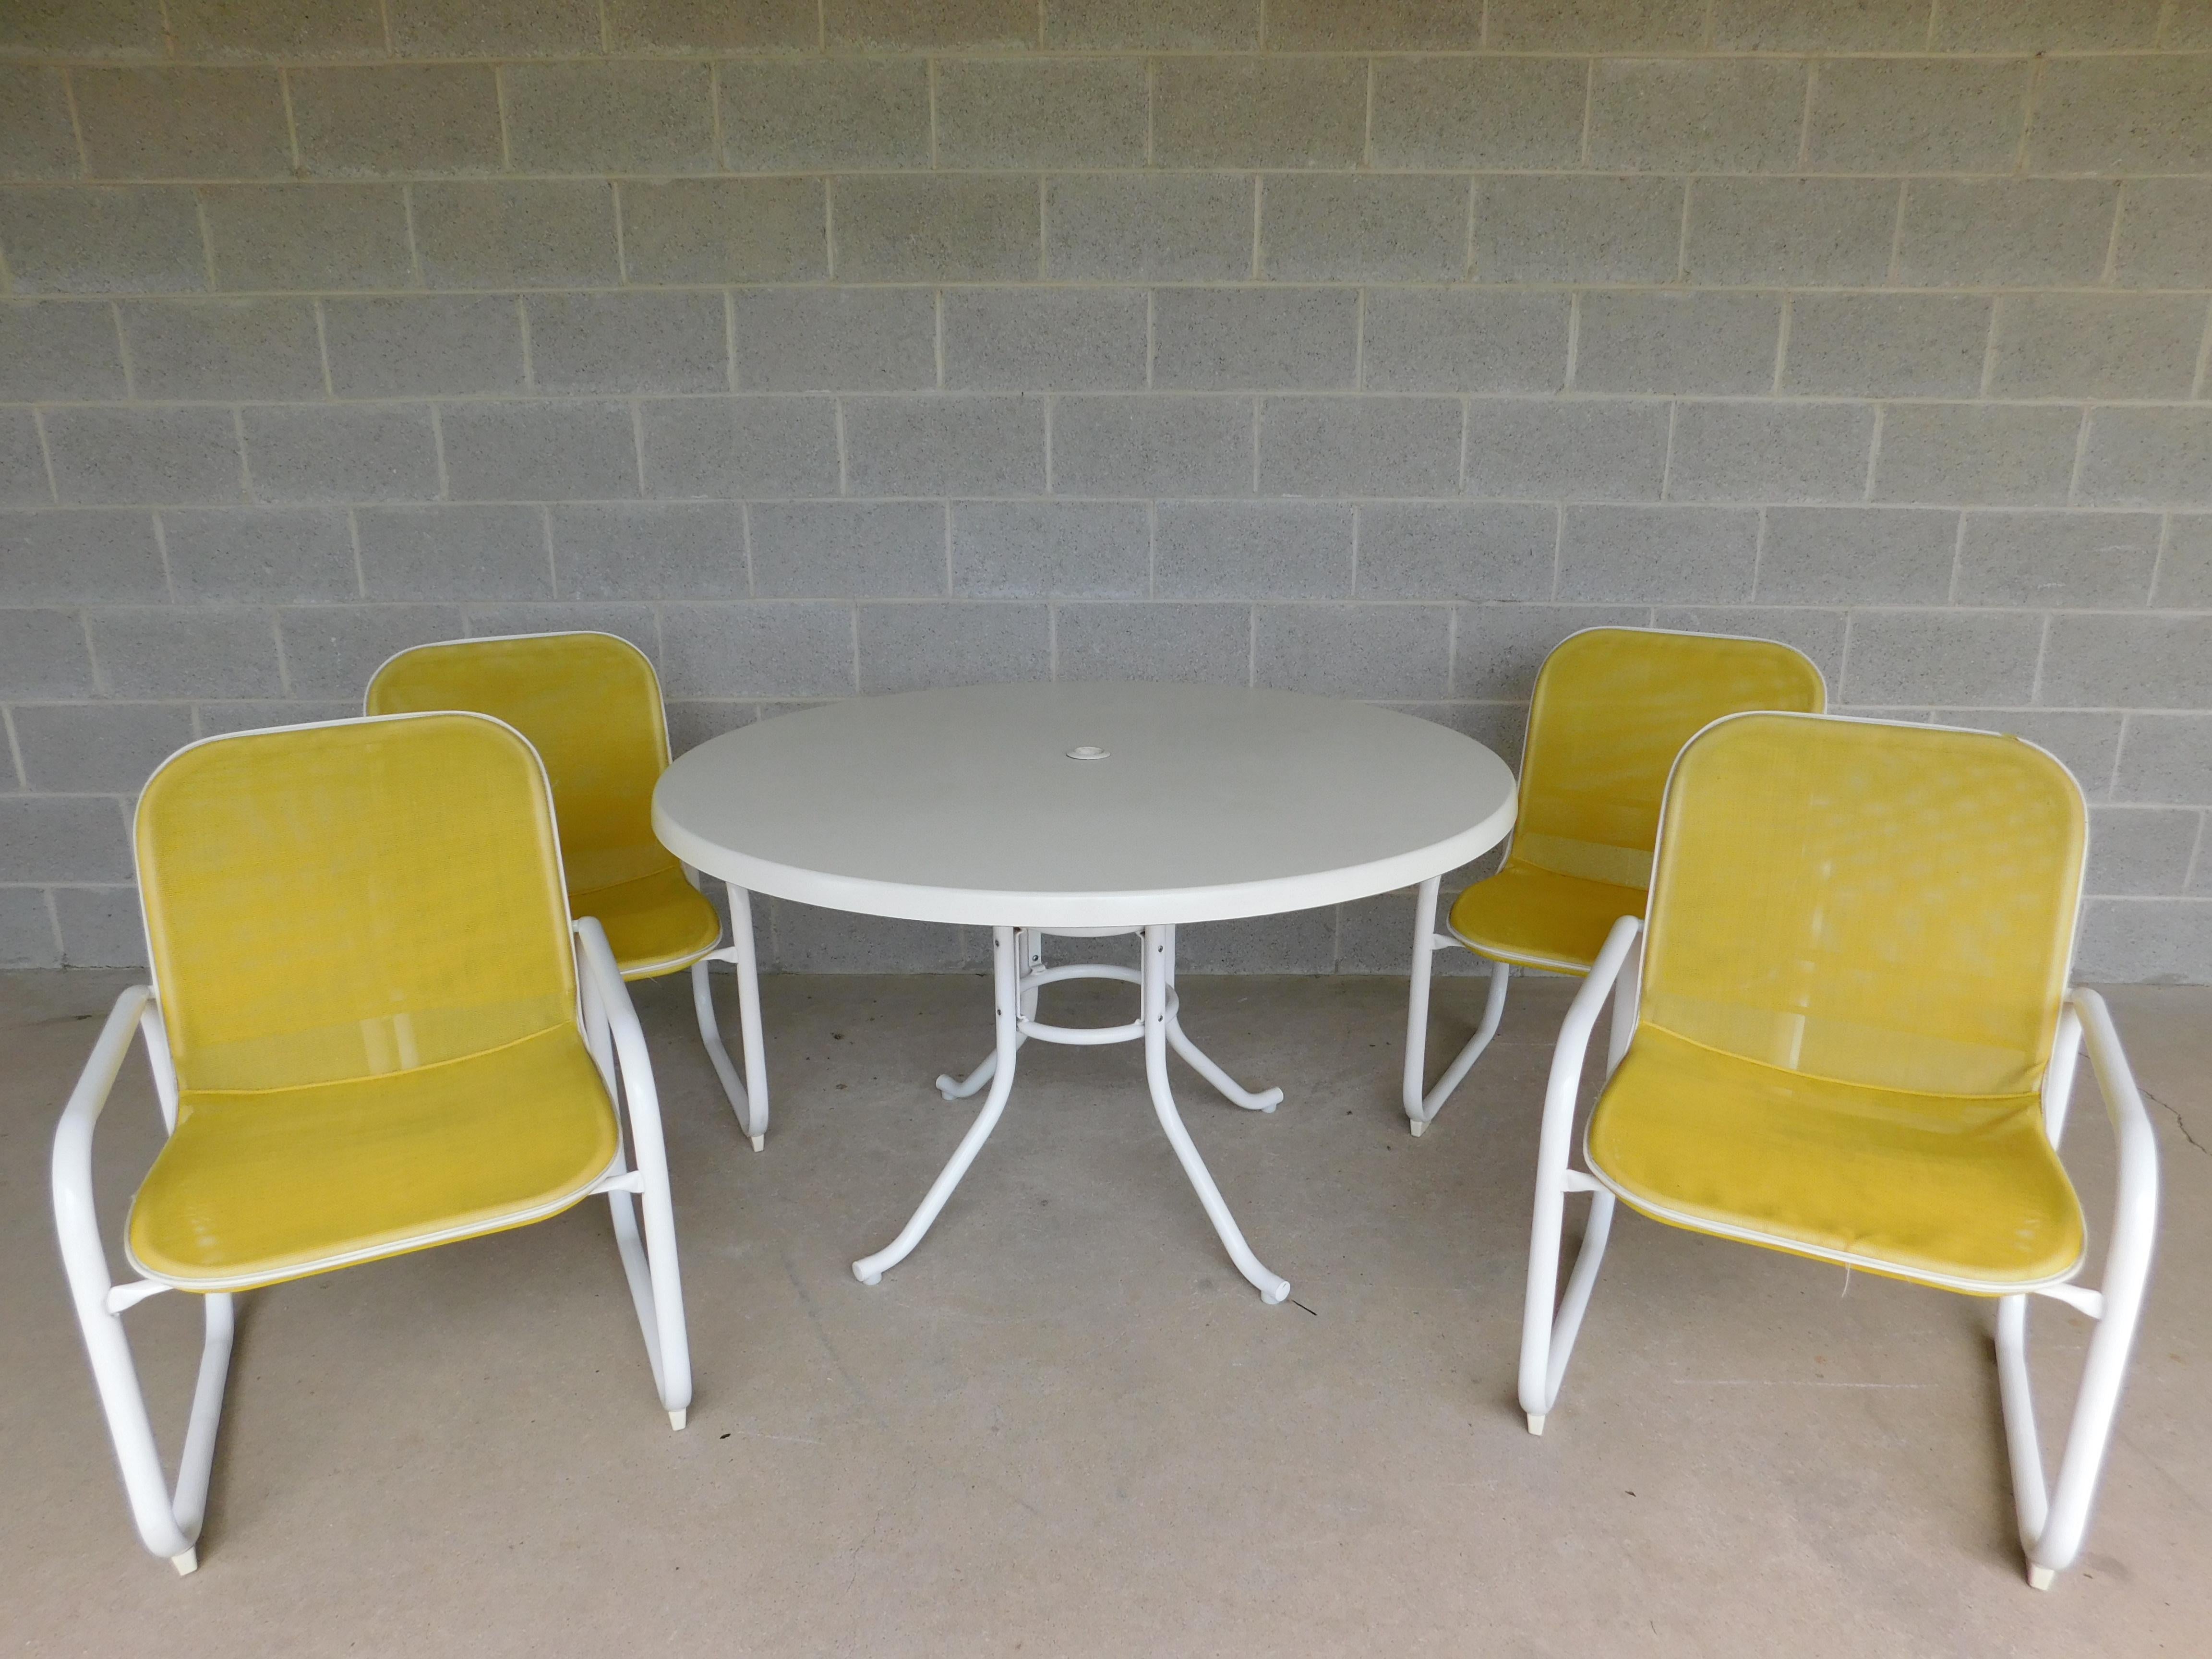 Features Quality Crafted, White Aluminum Frame / Base, Fiberglass Top Table, All Weather Mesh Synthetic Material for Chairs in Lemon Drop Yellow Color. 
Very Good Condition, original finish, 

Table 48